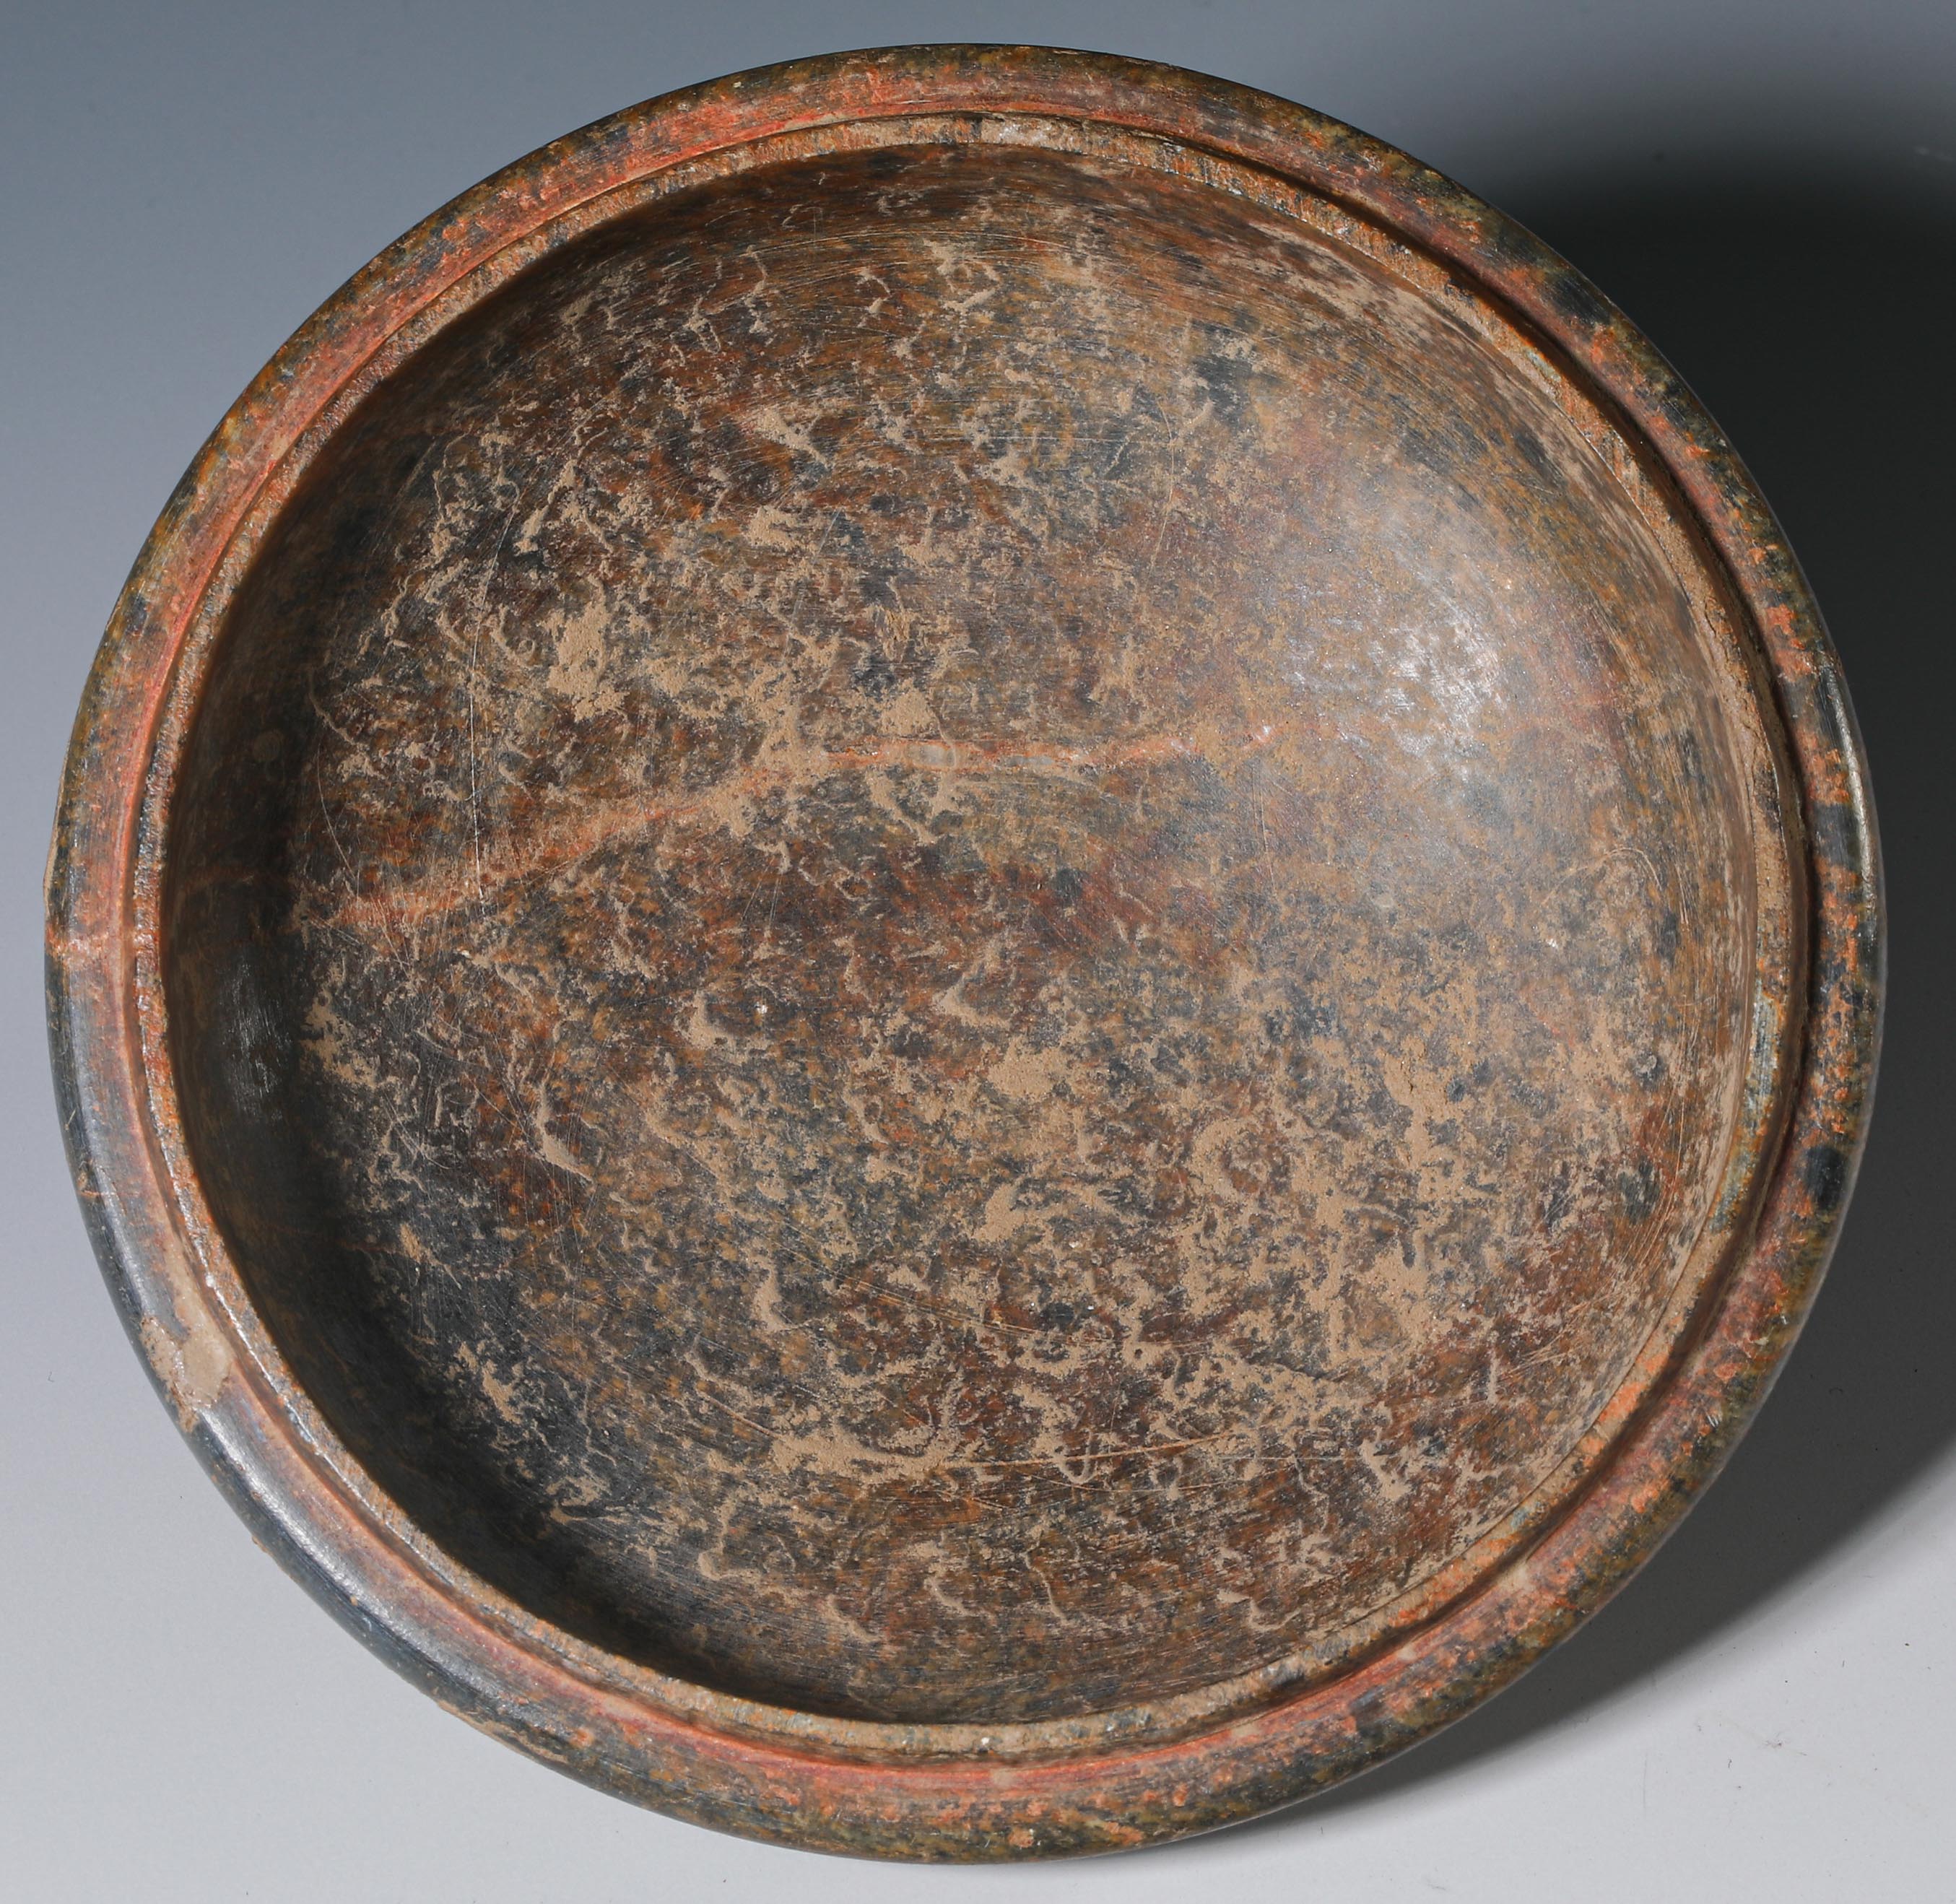 Copper incense burner  from the Han dynasty  - Image 11 of 11